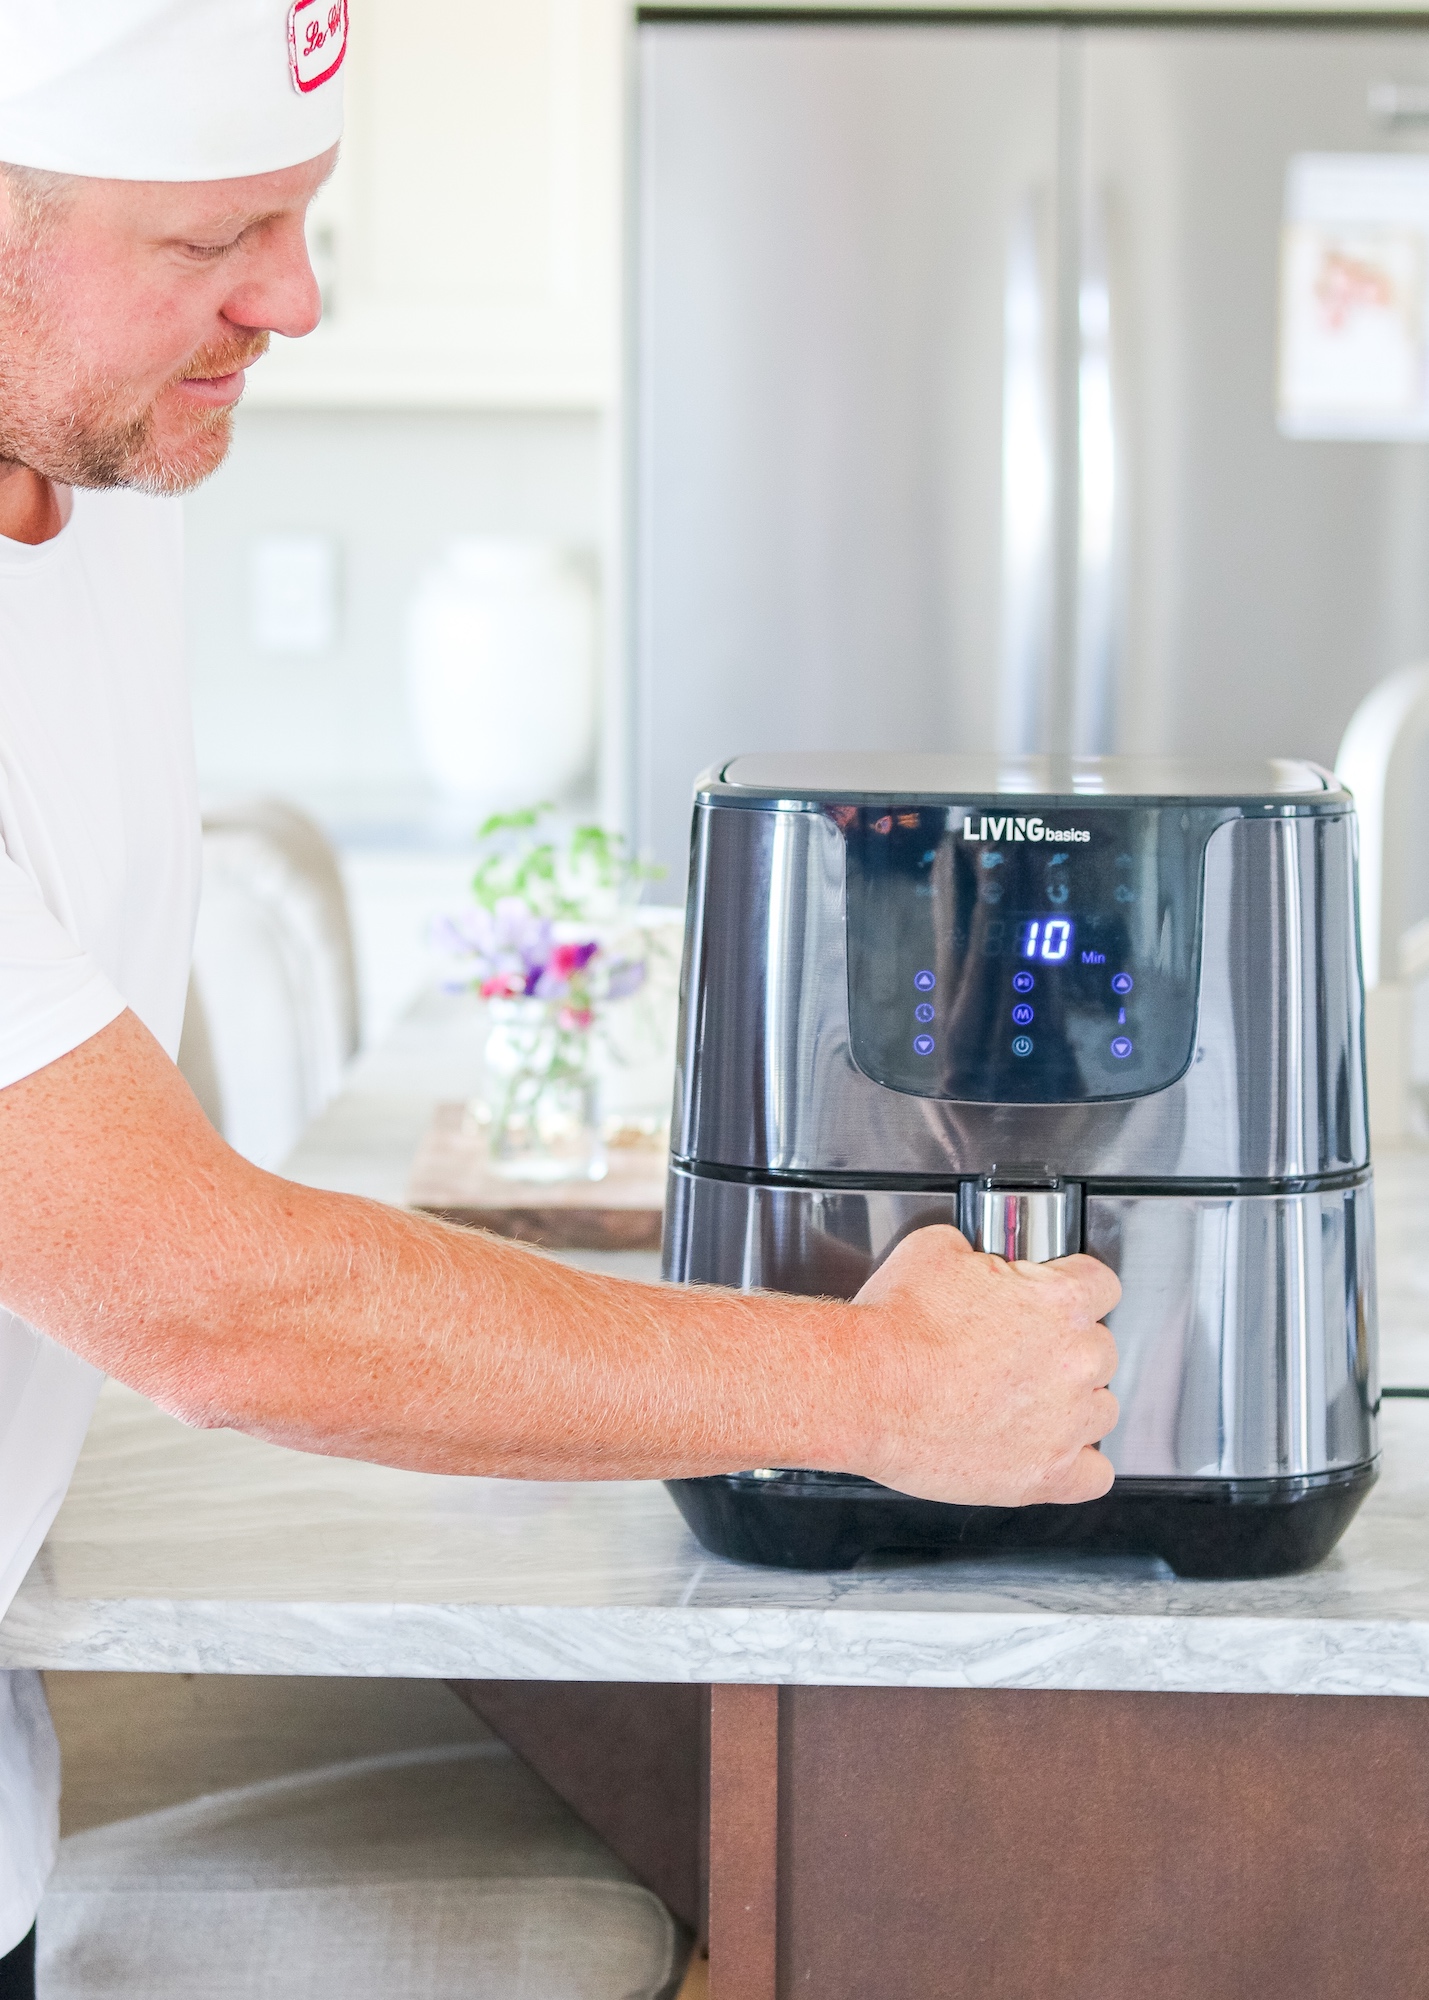 Cooking with ease with LivingBasics air fryer